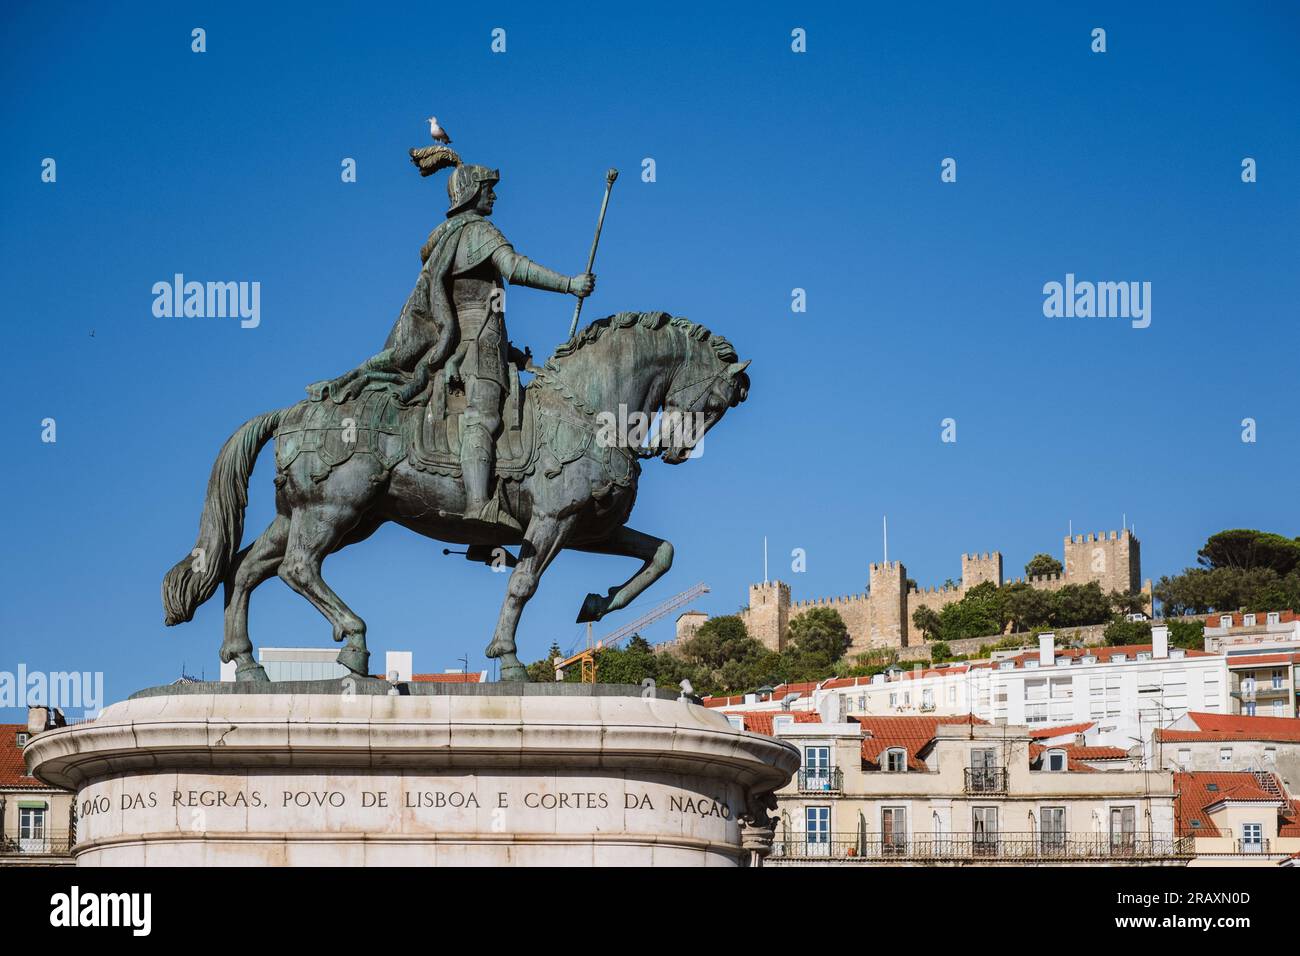 Statue of King John I standing tall in Praça da Figueira with the historic Lisbon Castle, a symbol of Portugal's rich heritage, in the background. The Stock Photo